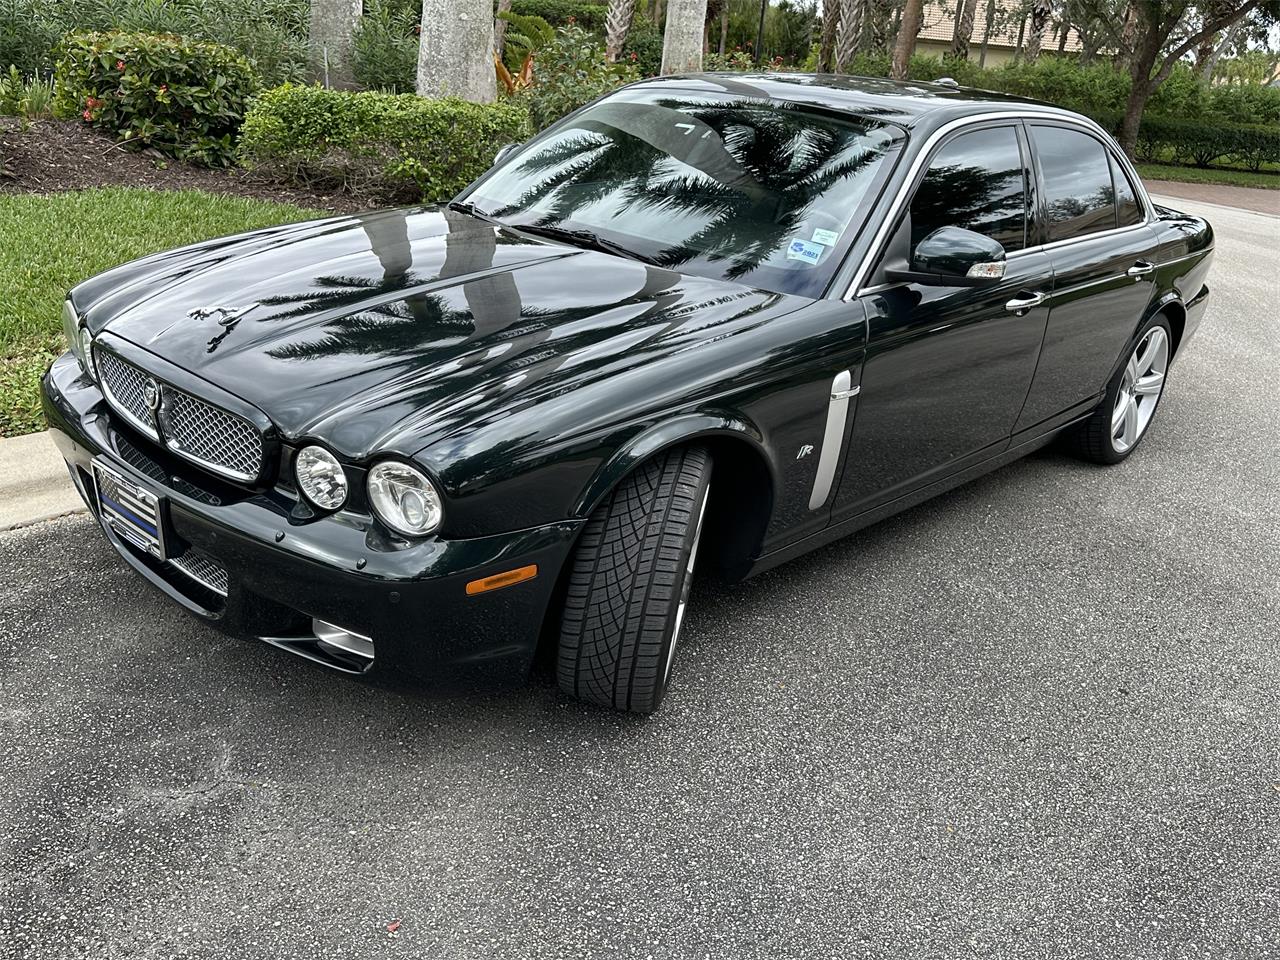 For Sale: 2008 Jaguar XJR in Fort Myers, Florida for sale in Fort Myers, FL